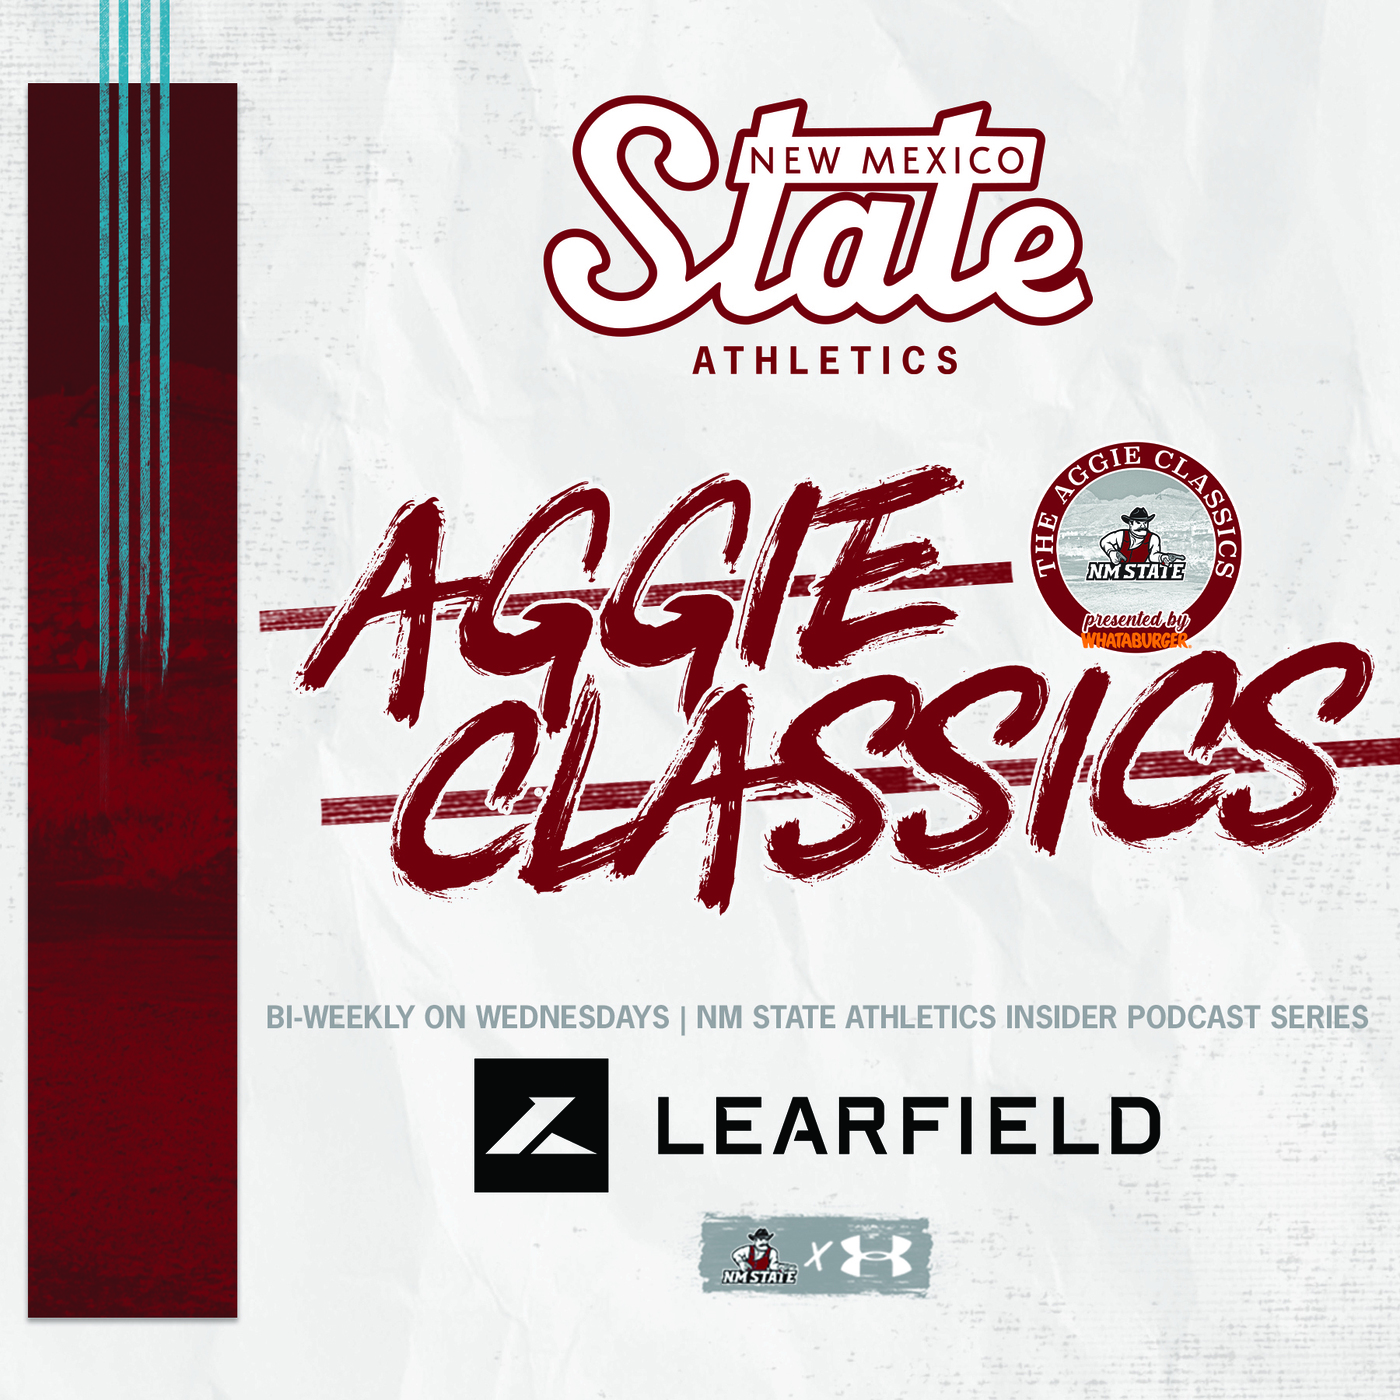 Aggie Classics Sponsored by Whataburger | 2/2/91 MBB at Long Beach State